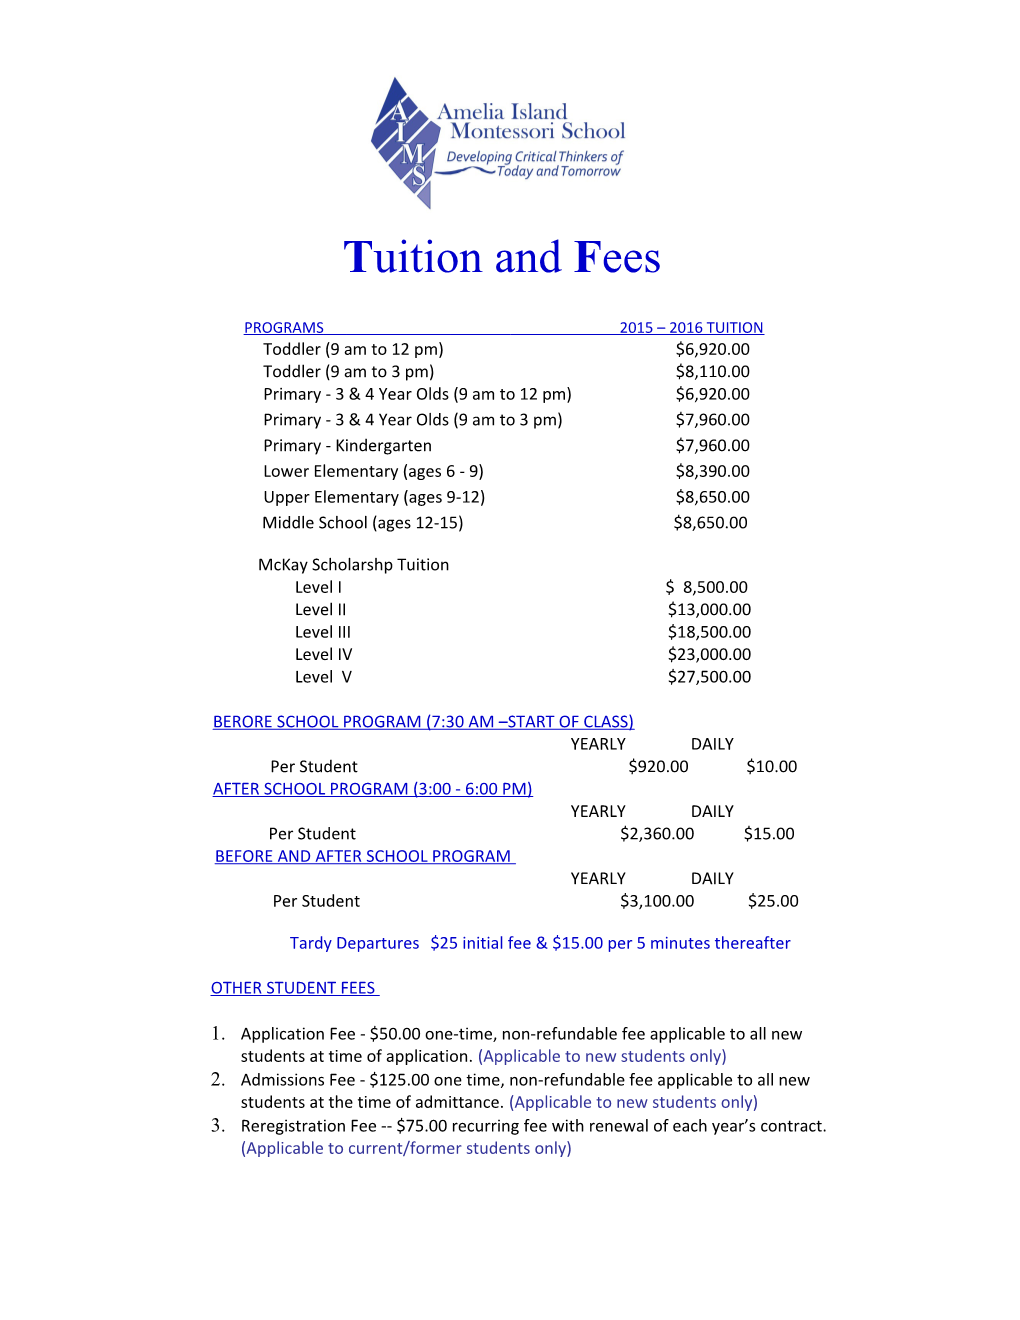 About Tuition and Fees